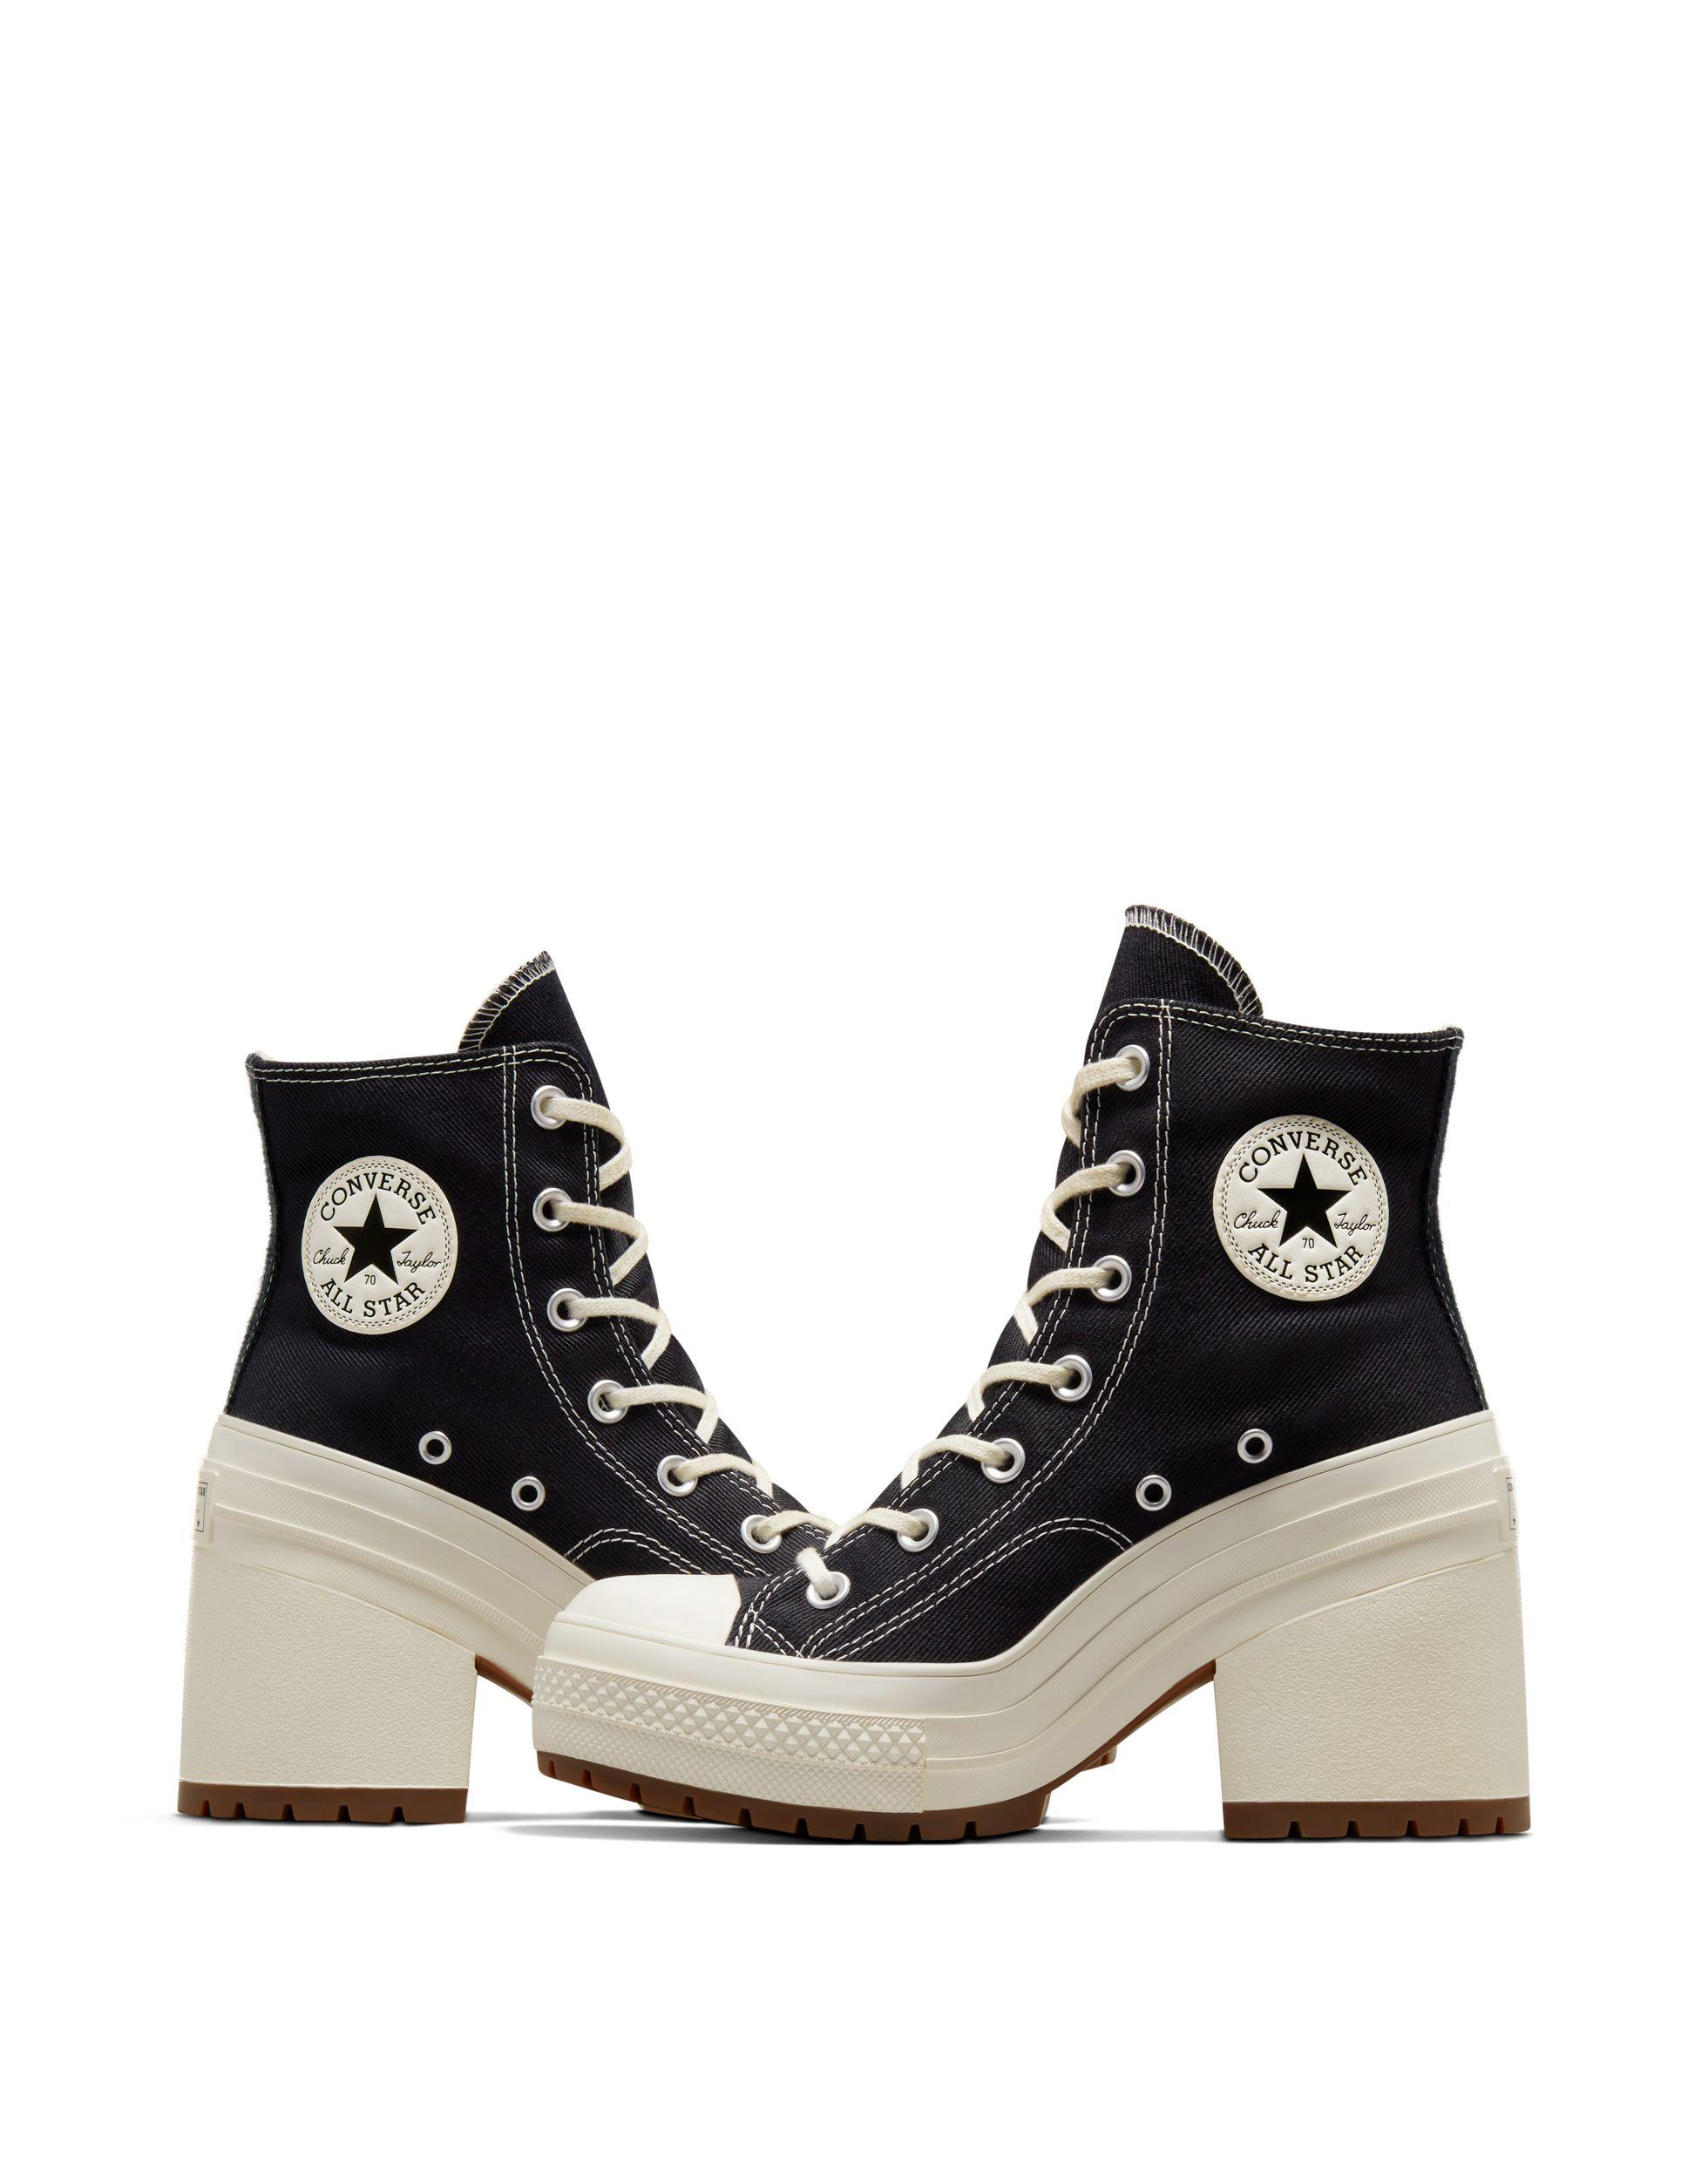 Converse Chuck Taylor 70s Deluxe Heeled Sneaker in Black | Lyst